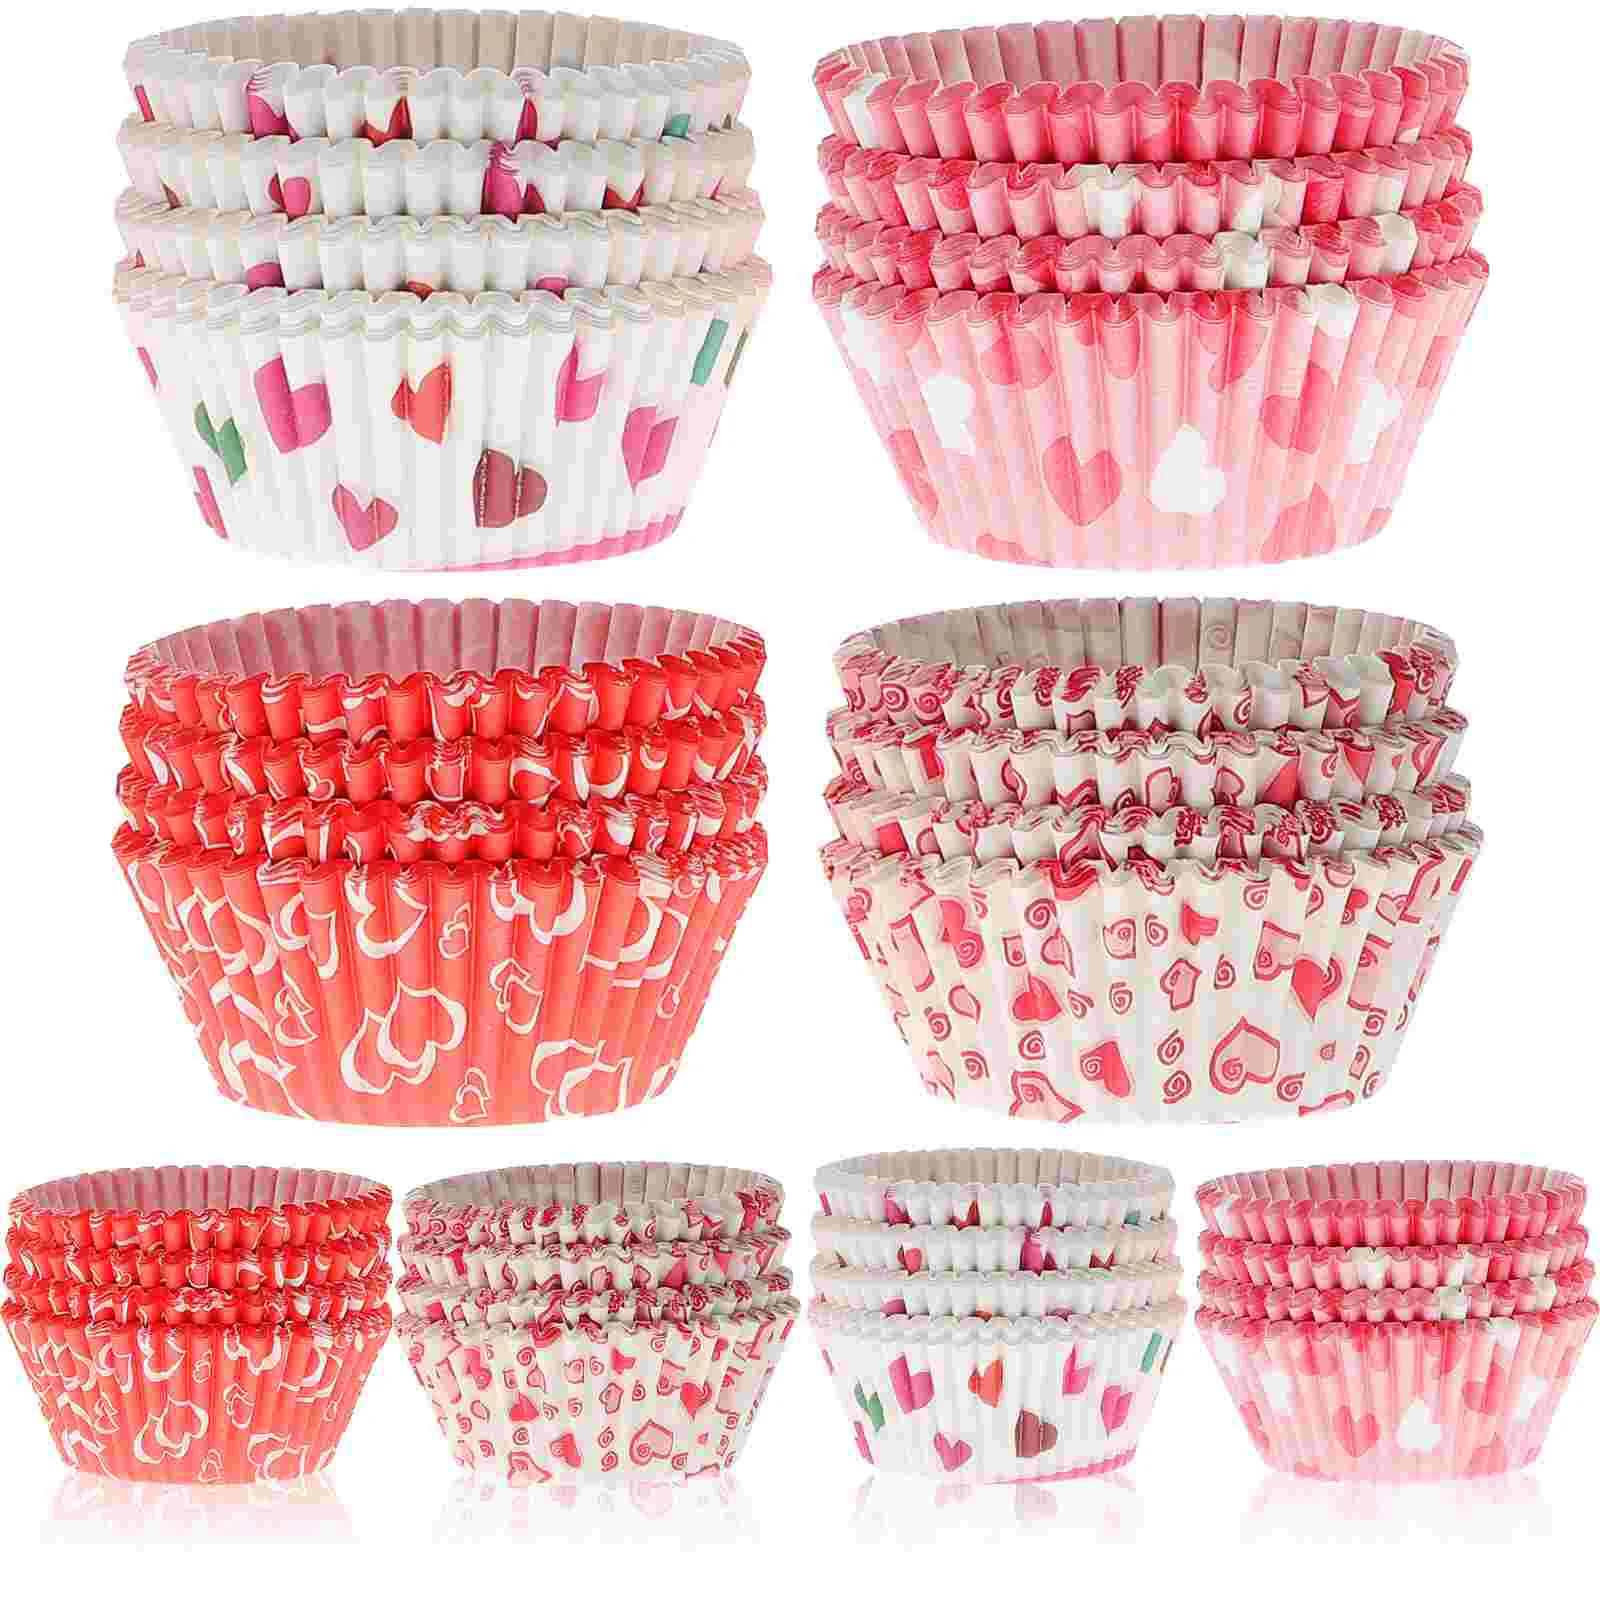 

Liners Cupcake Muffin Cups Wrappers Paper Baking Candy Mini Wedding Pan Molds Party Pastry Valentine Cup Cake Supplies Heart